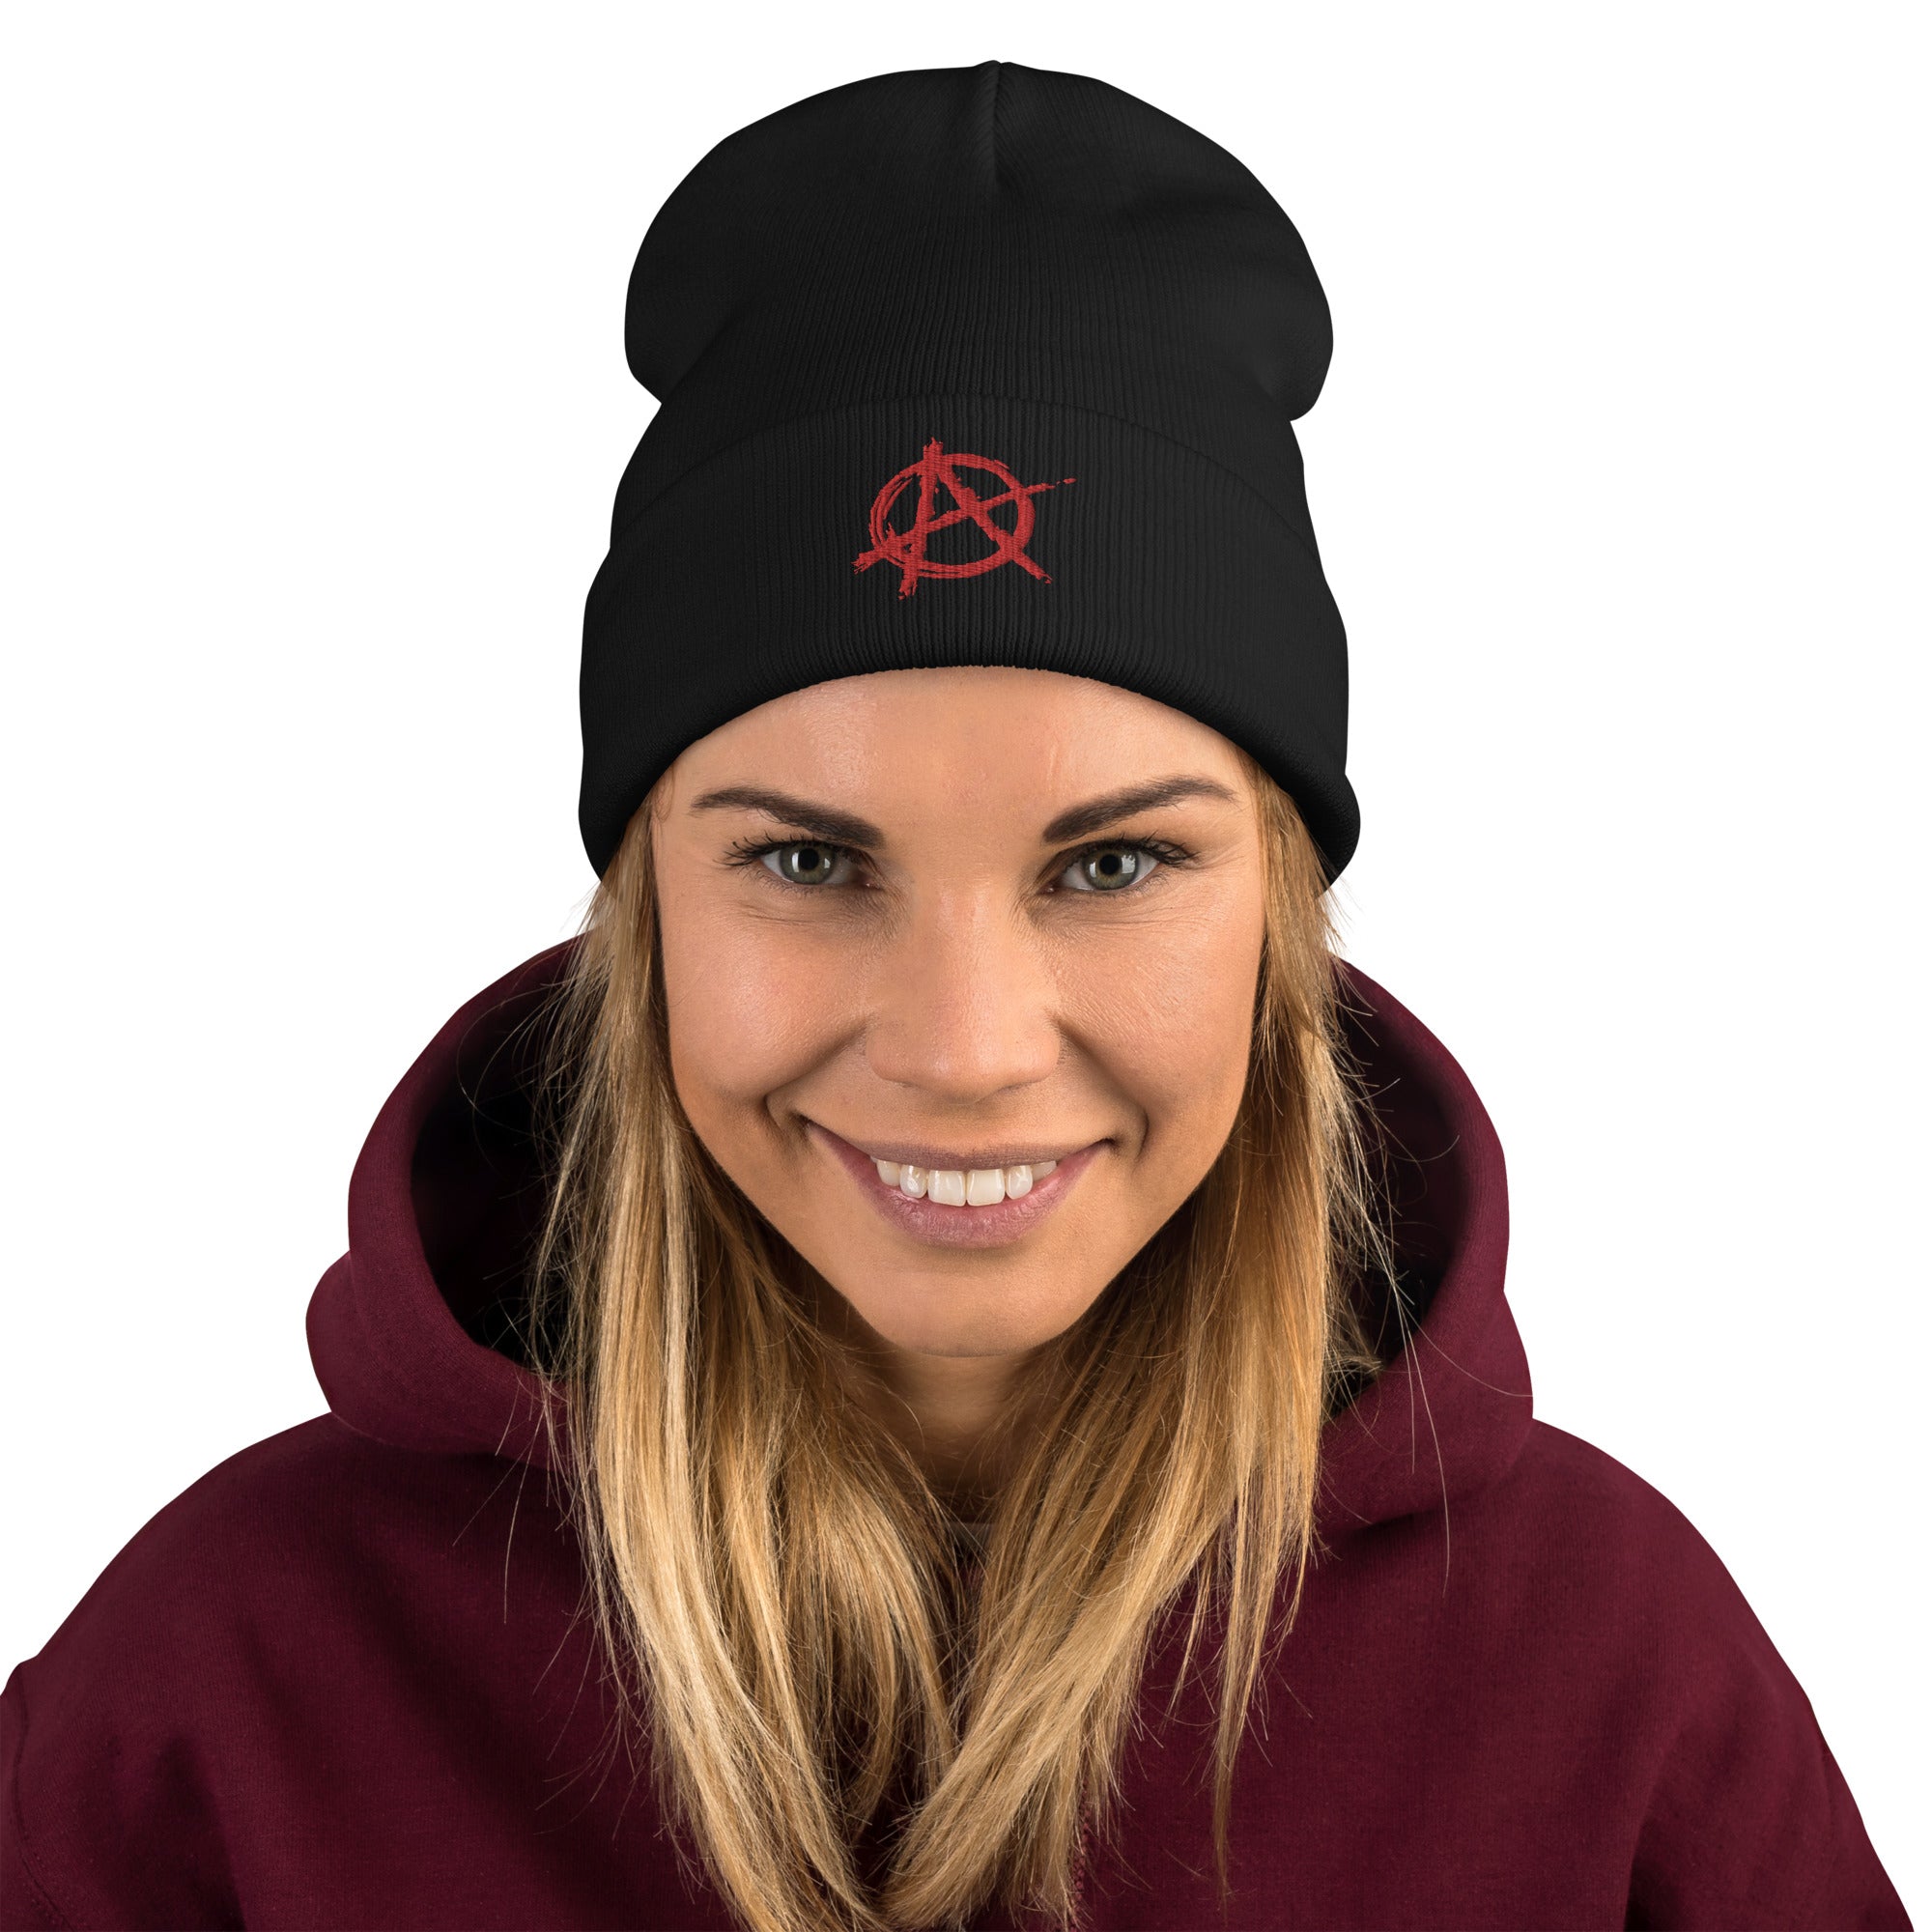 Anarchy Sign Punk Chaos and Rock n' Roll Embroidered Cuff Beanie Red Thread - Edge of Life Designs